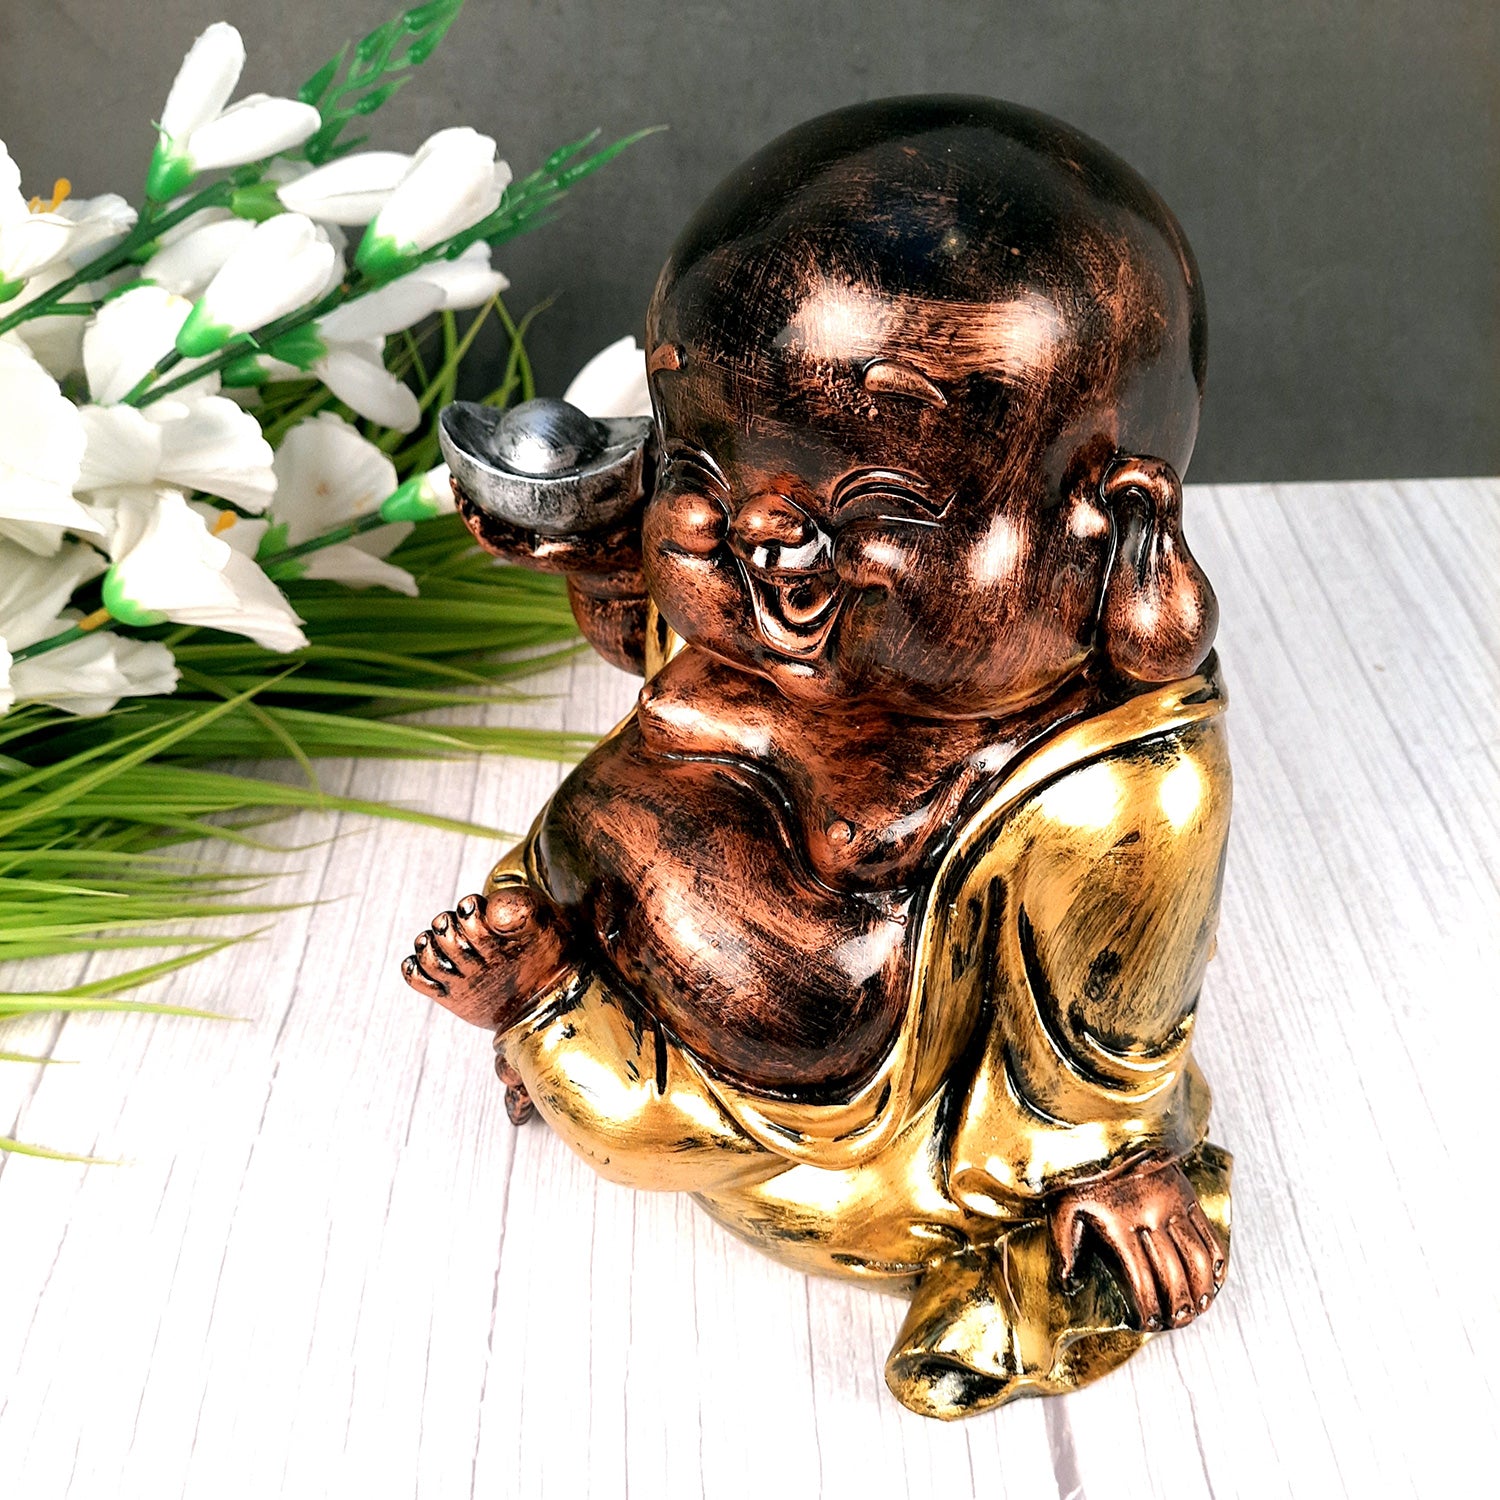 Laughing Buddha Showpiece For Good Luck | Baby Monk Statue - for Money, Happiness, Positivity, Home Decor & Gift - 8 Inch - apkamart